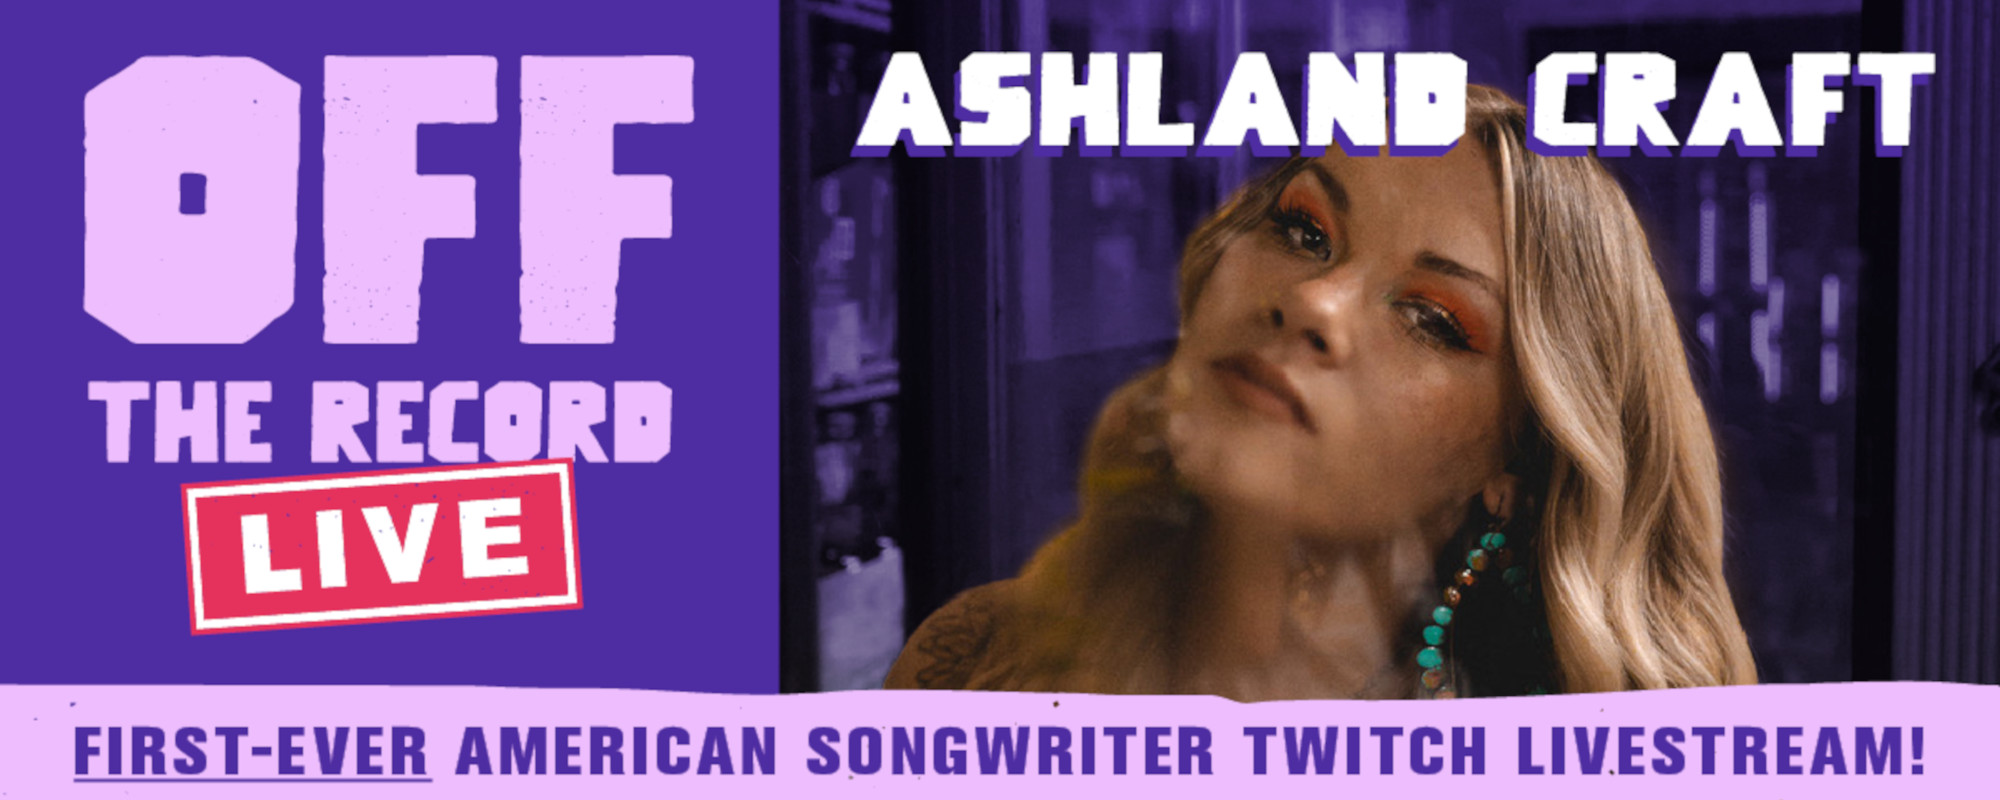 ‘Off The Record Live’: Ashland Craft Talks Debut Album, Pandemic Experience, Miley Cyrus and More